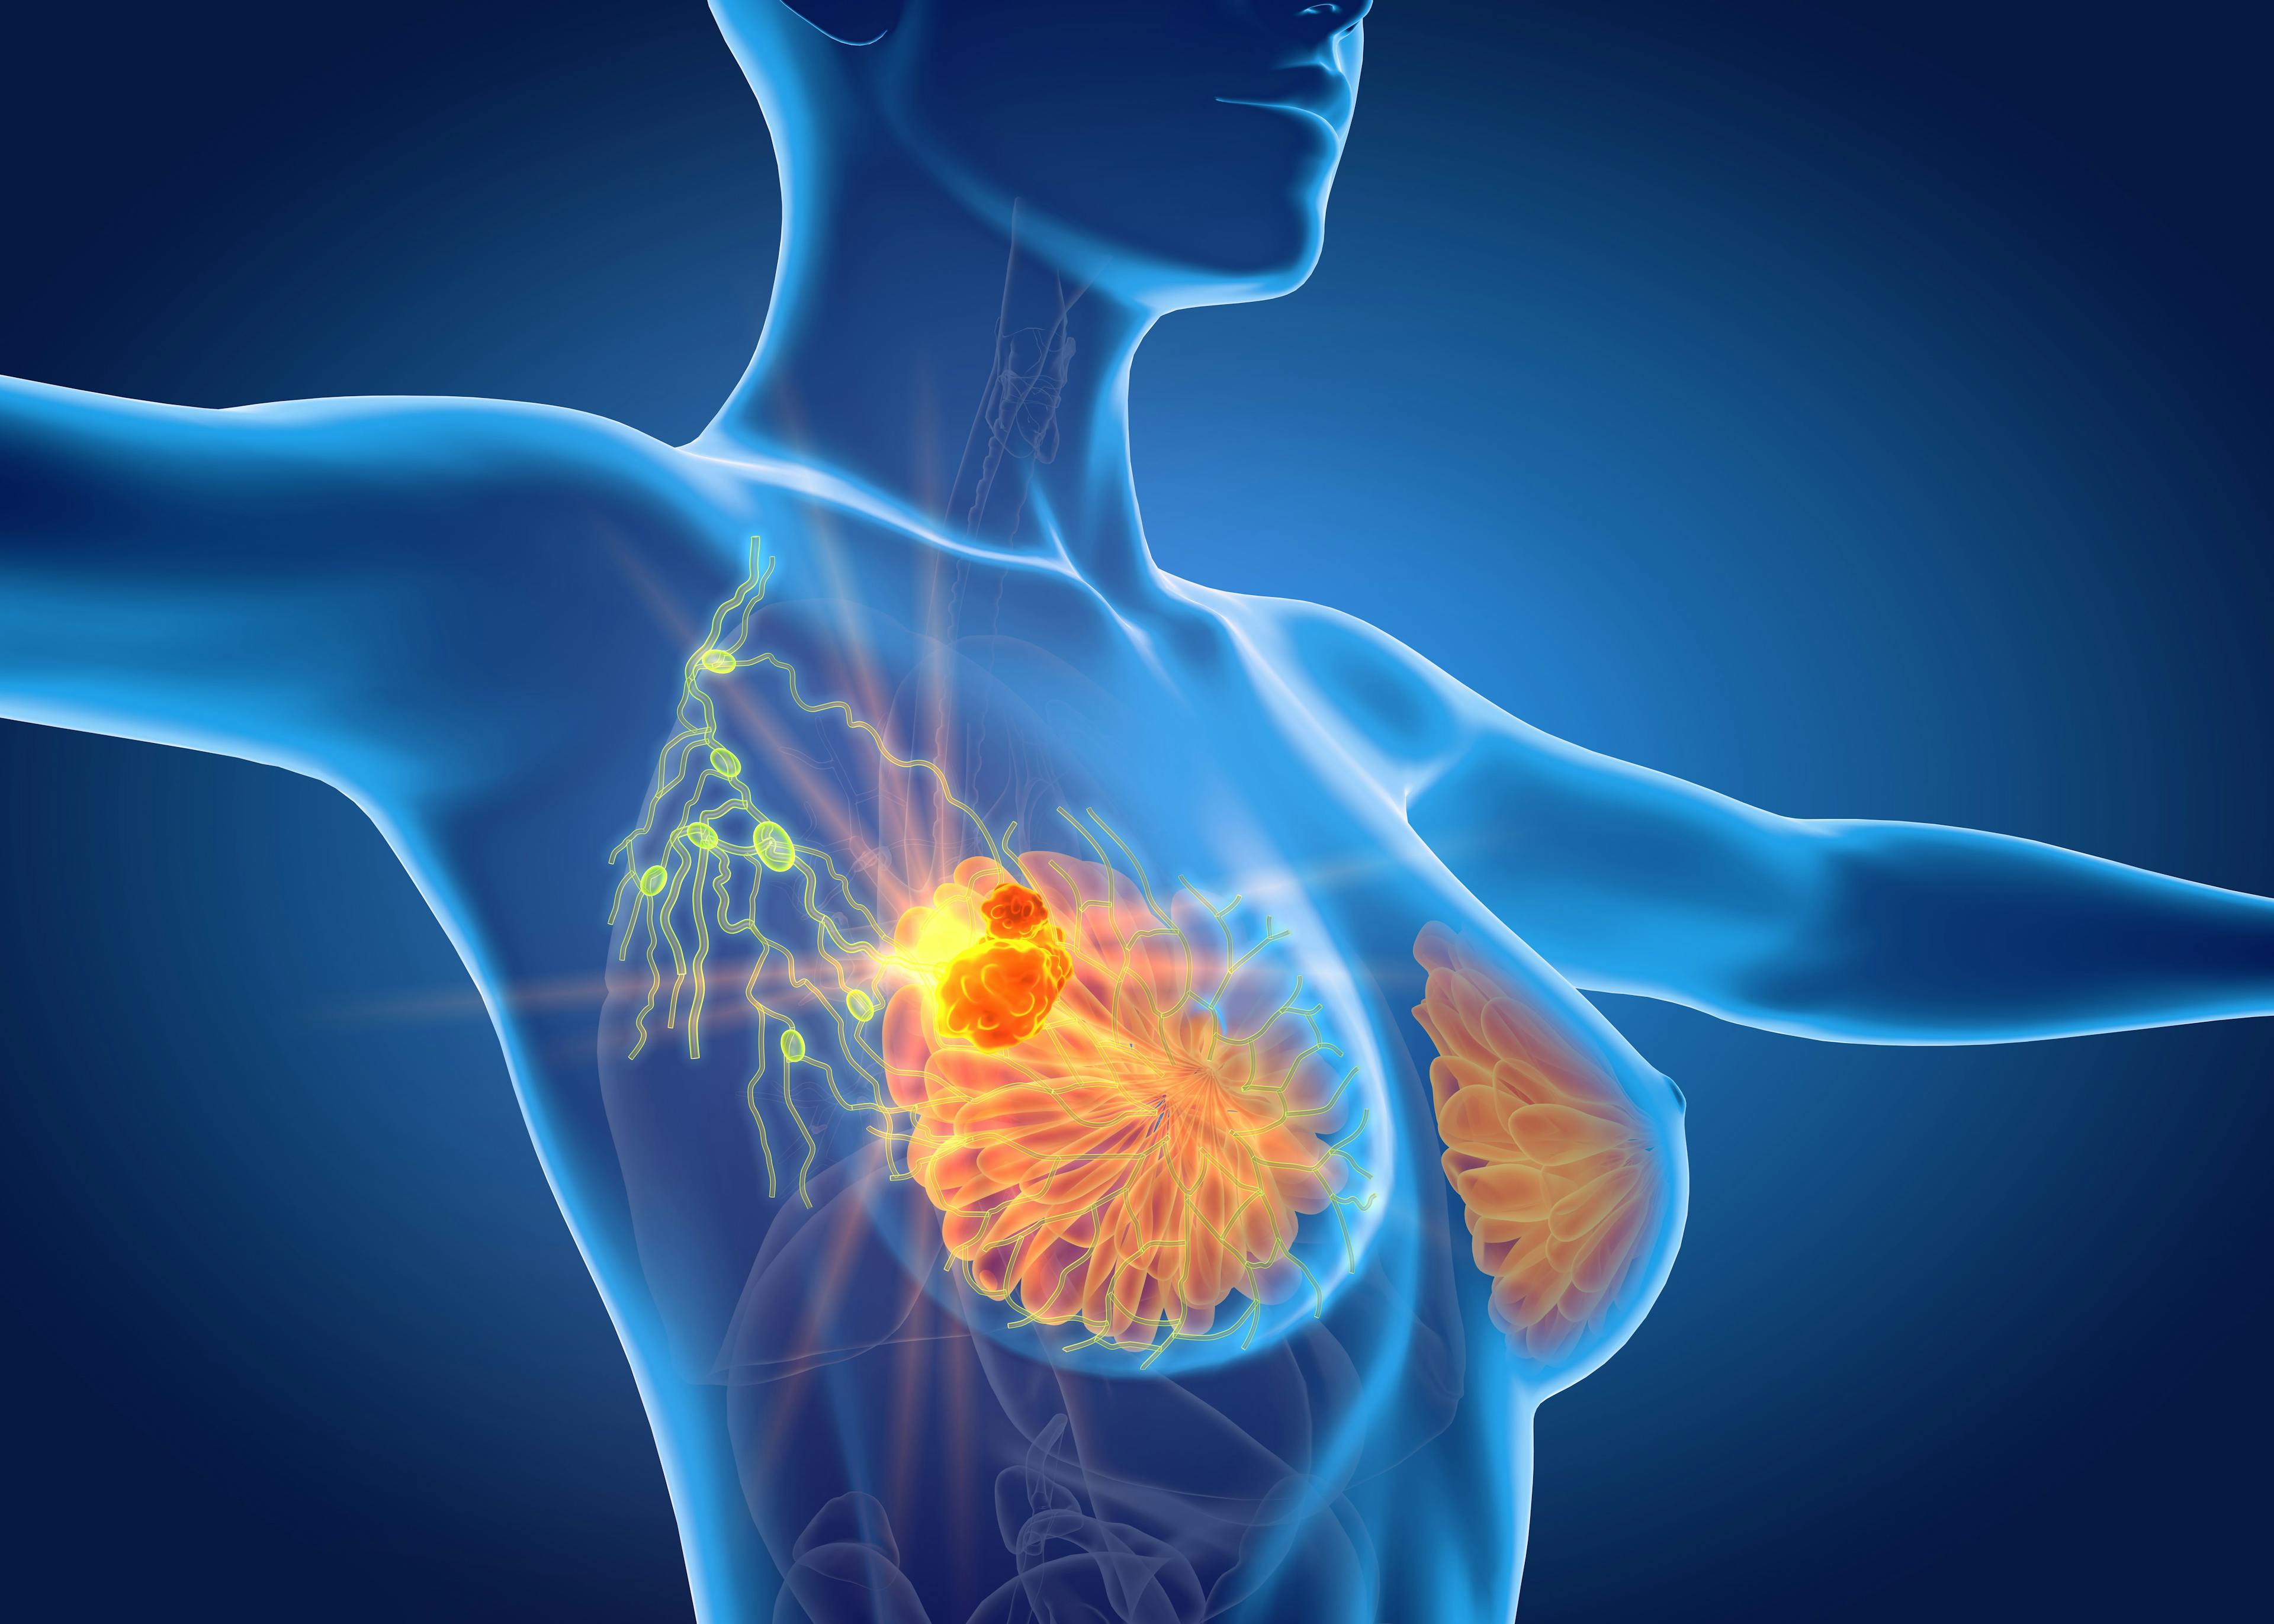 Clipping of Lymph Nodes May Aid Axillary Surgery in Breast Cancer